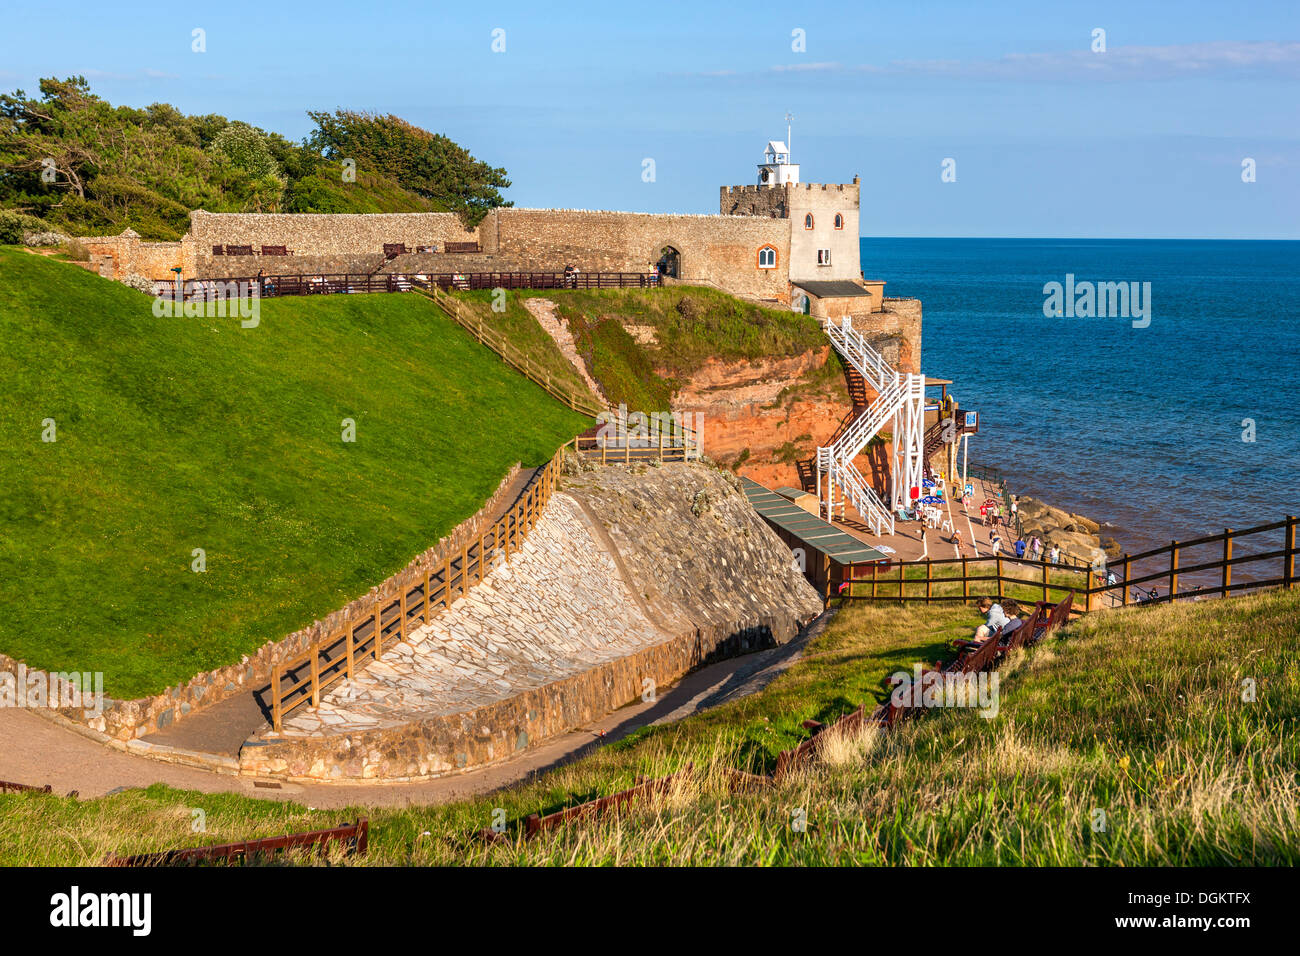 Jacob's Ladder and the castle wall. Stock Photo